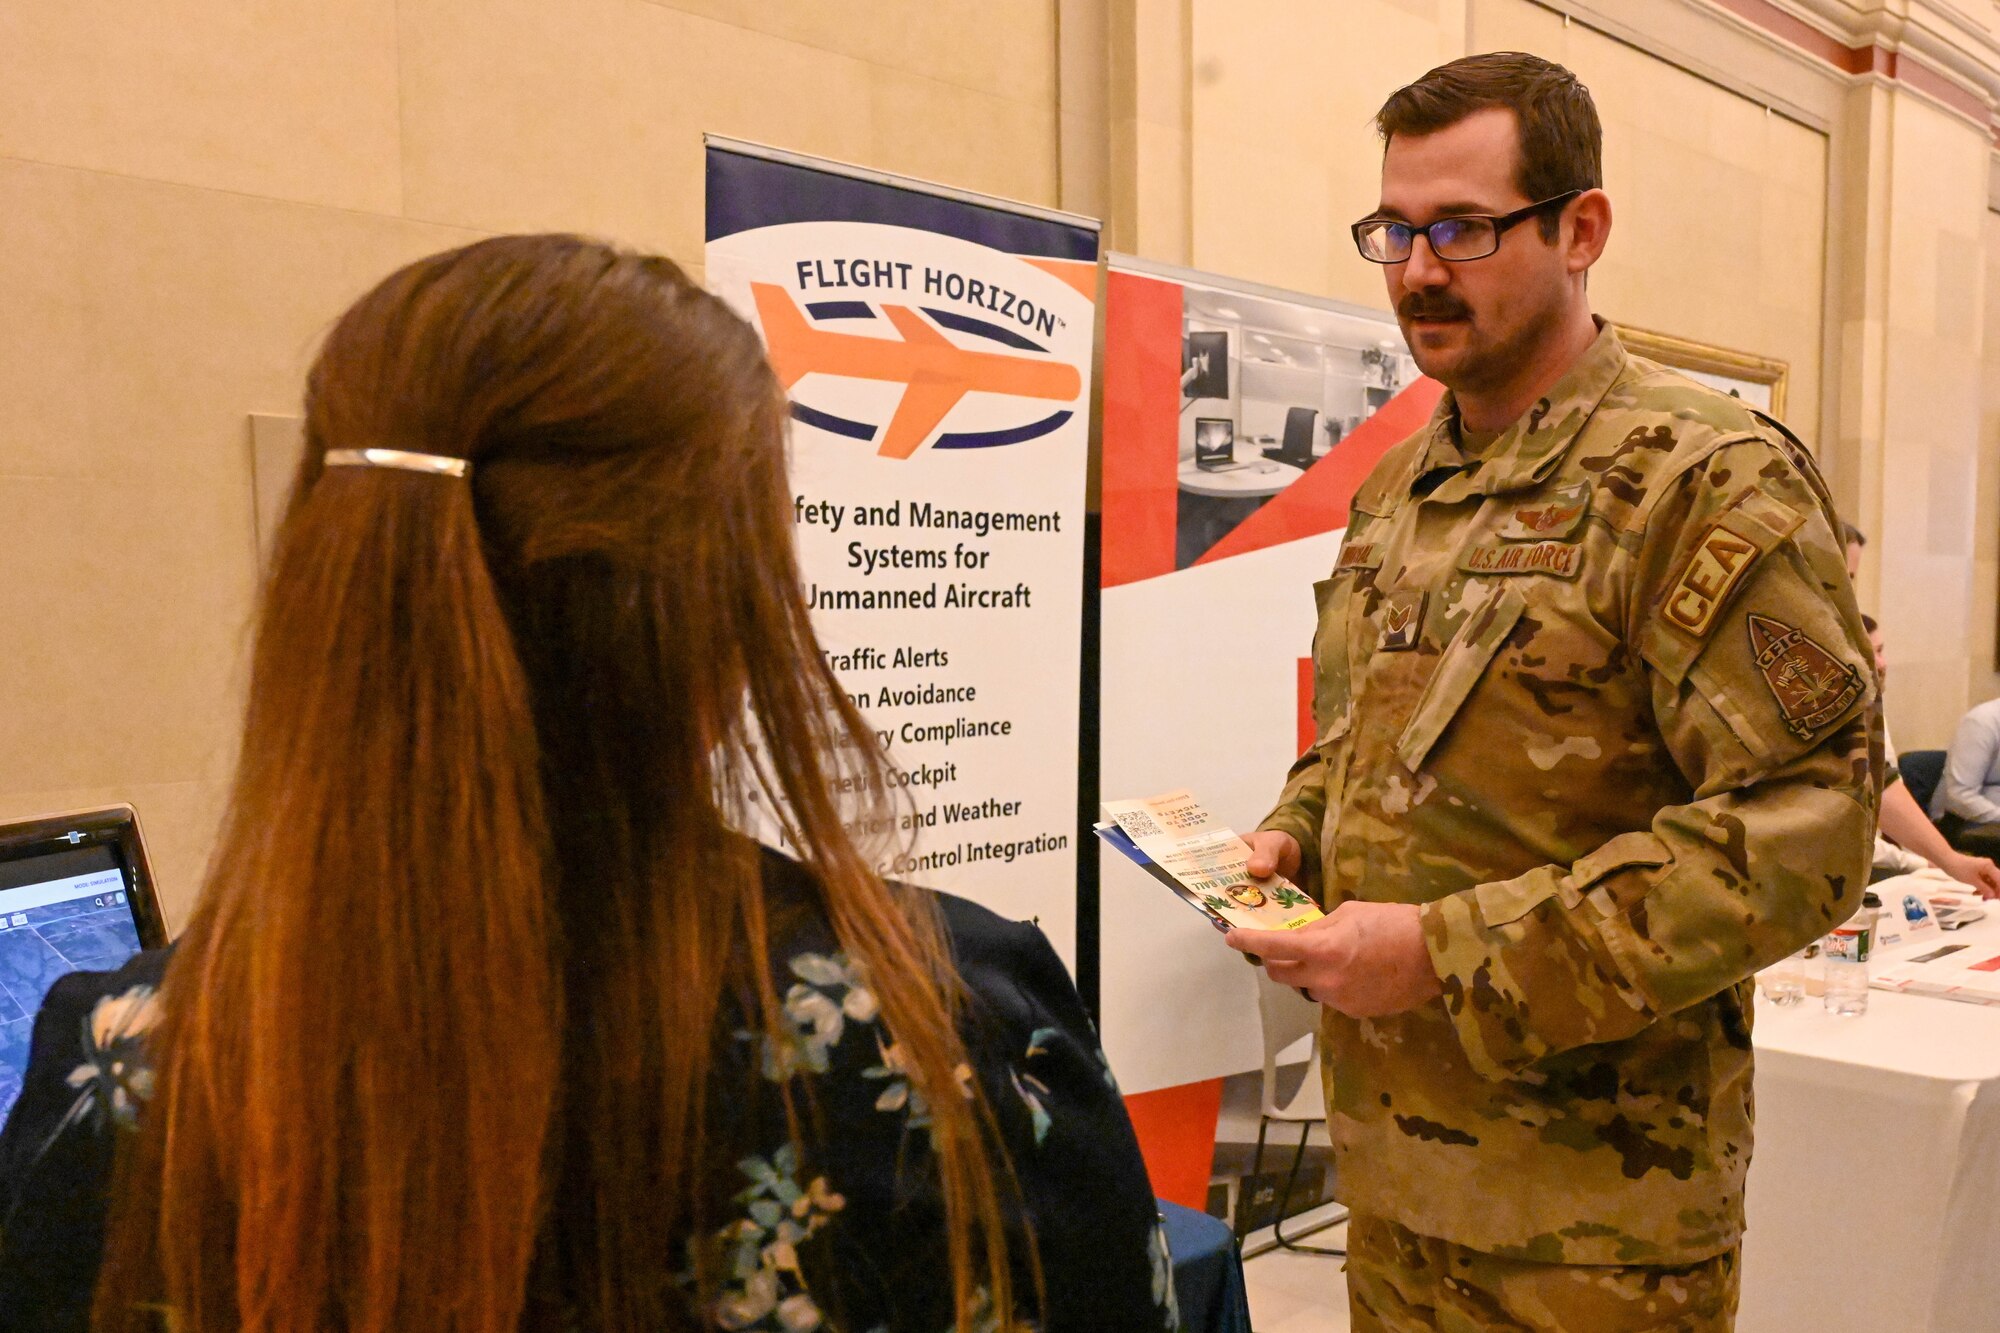 U.S. Air Force Staff Sgt. Jeff Michal, 54th Air Refueling Squadron boom operator instructor, talks with Andrea Jones, Vigilant Aerospace Systems administrative and marketing assistant, at the 2023 AERO Oklahoma Aviation, Aerospace and Defense Awareness at the Oklahoma State Capitol, March 22, 2023. Airmen had the opportunity to visit information booths and learn about the flying community across Oklahoma. (U.S. Air Force photo by Senior Airman Trenton Jancze)